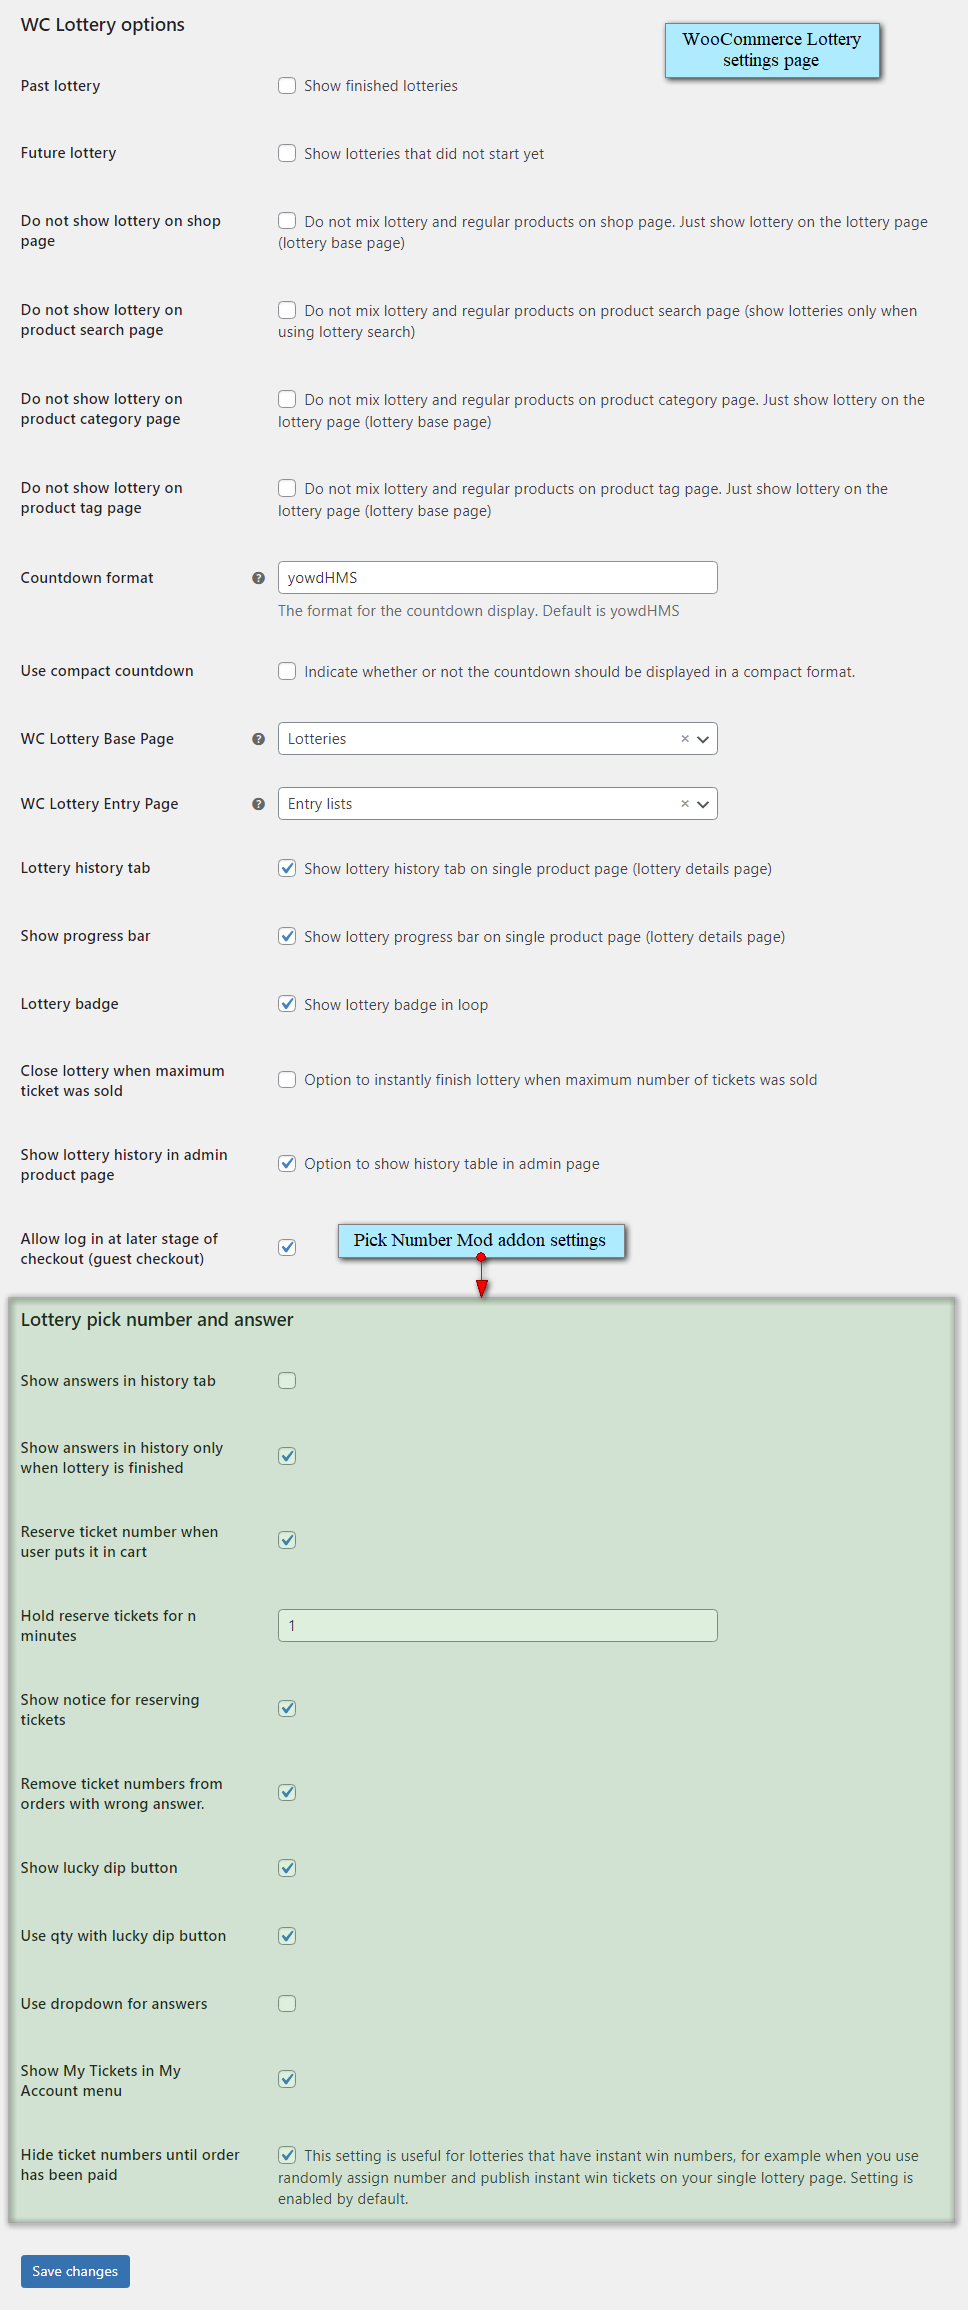 WooCommerce lottery settings without pick number mod addon